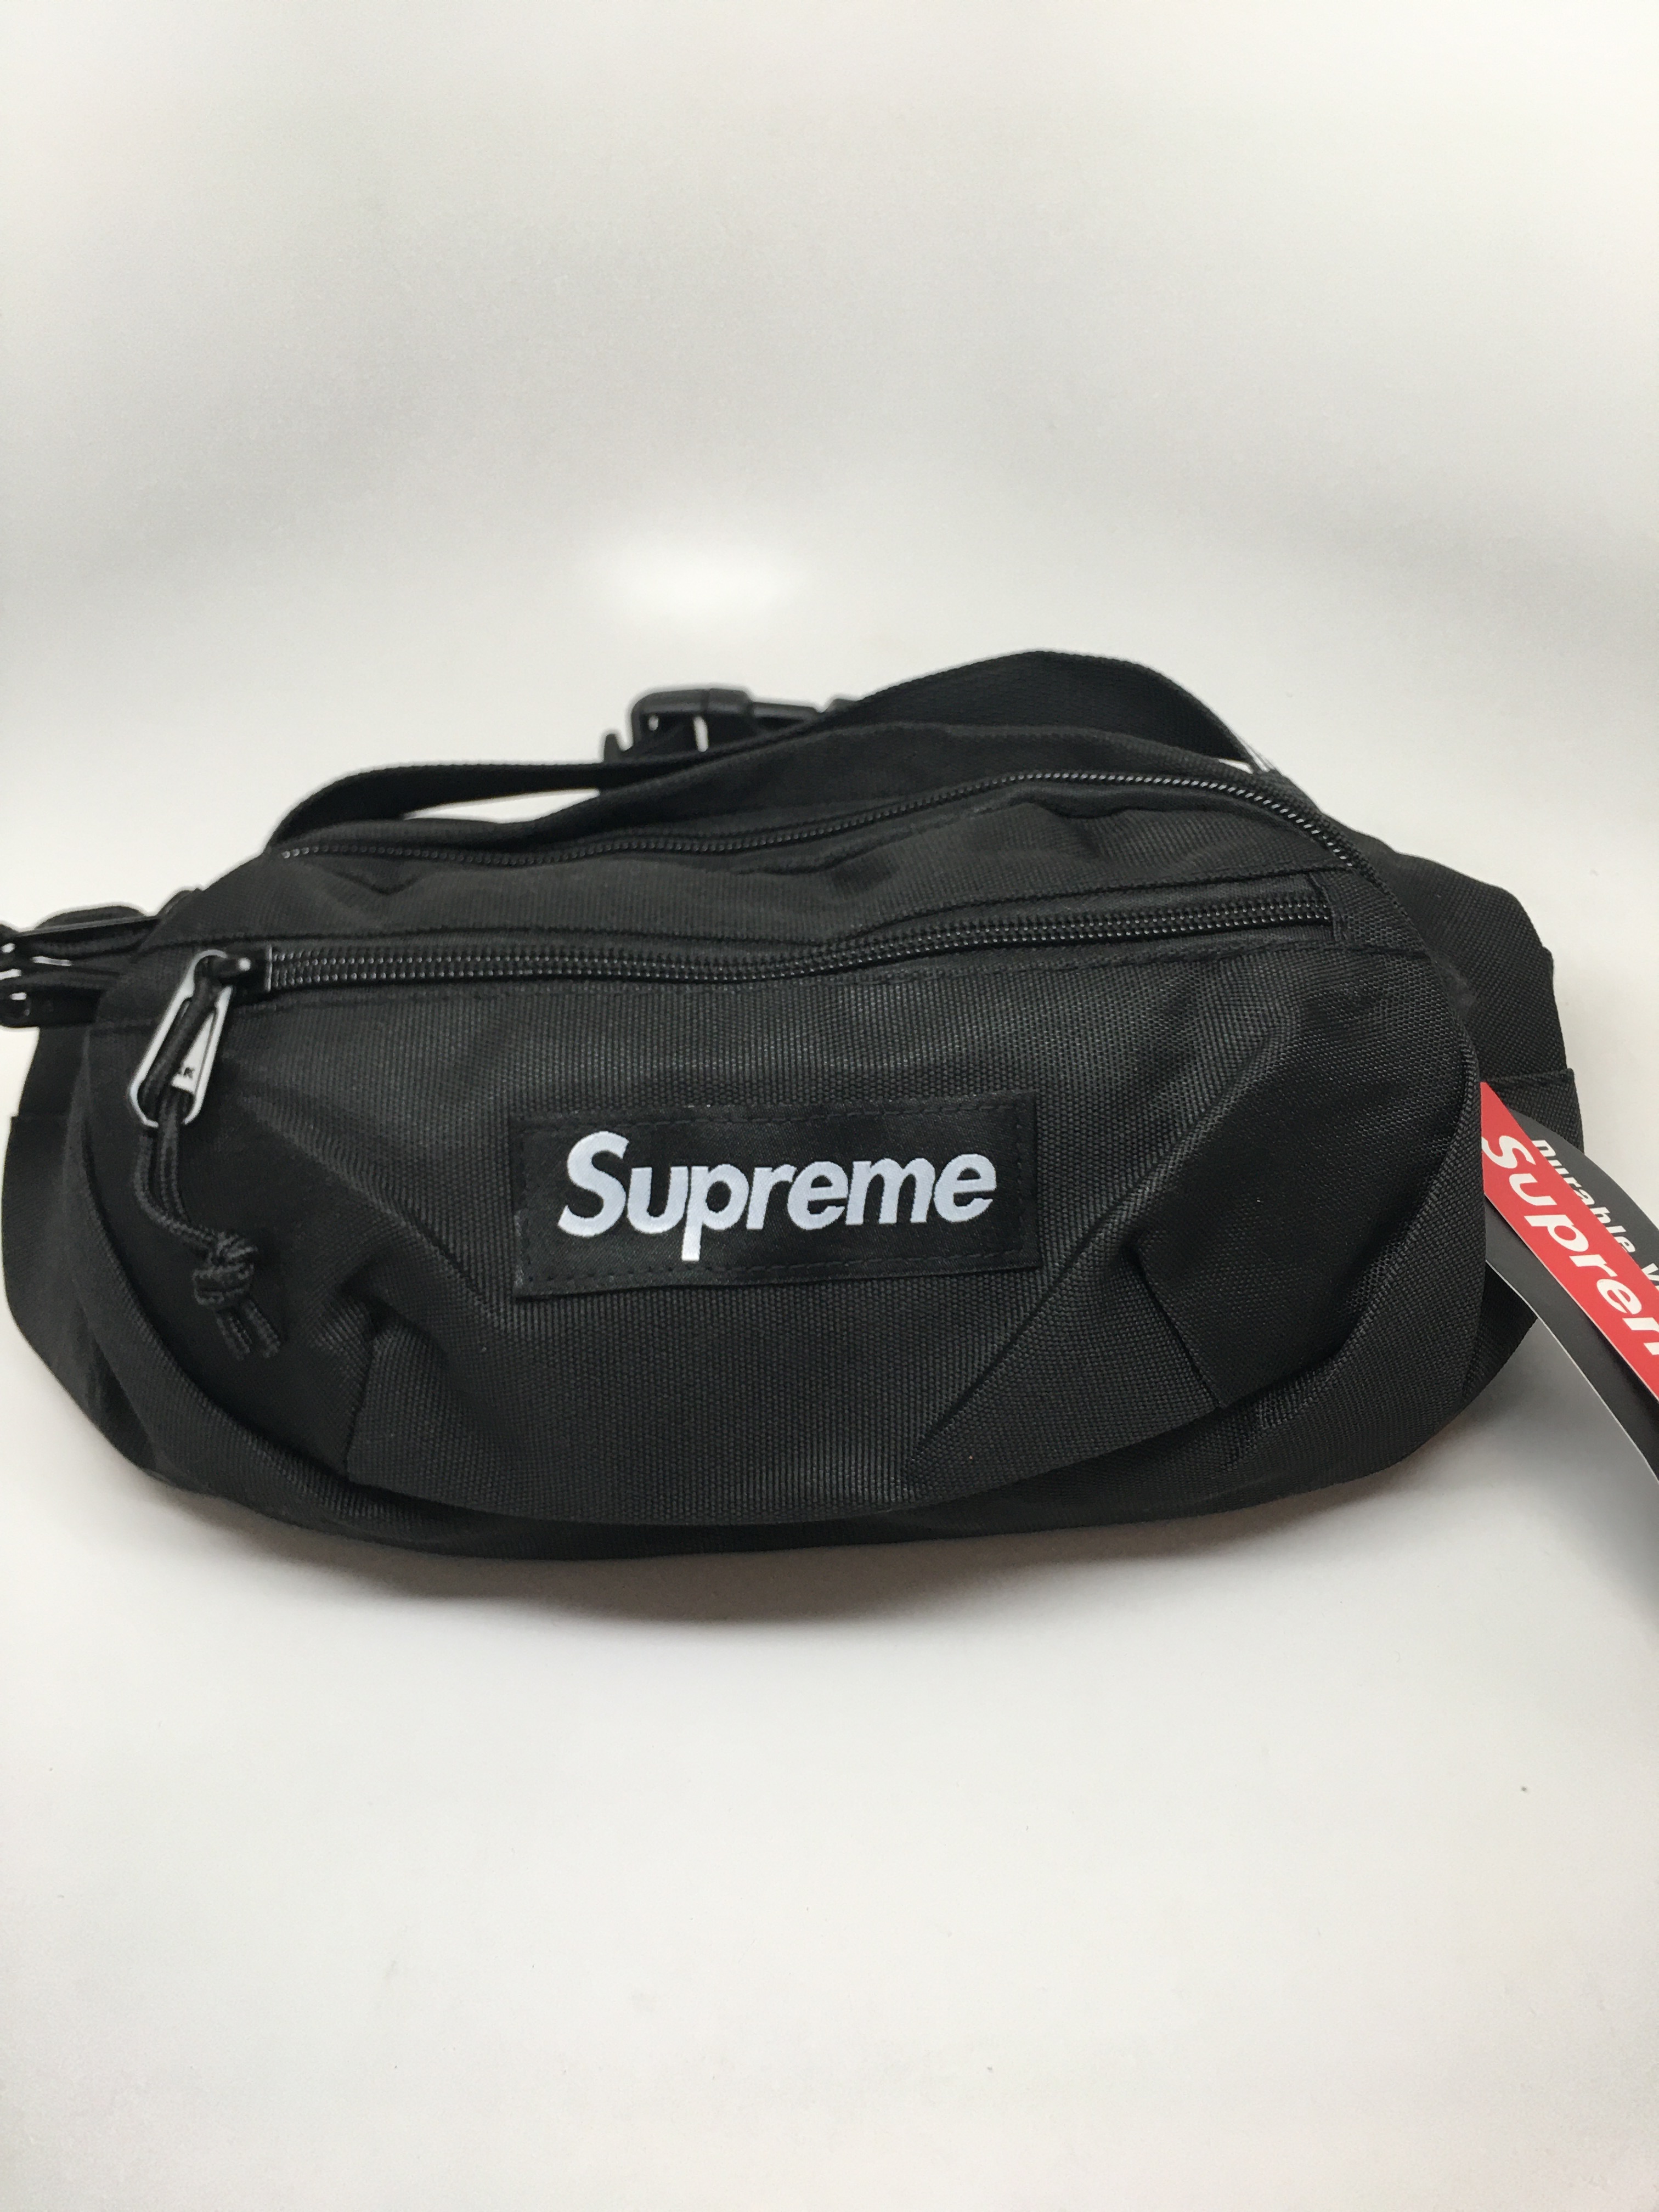 Real Supreme Fanny Pack